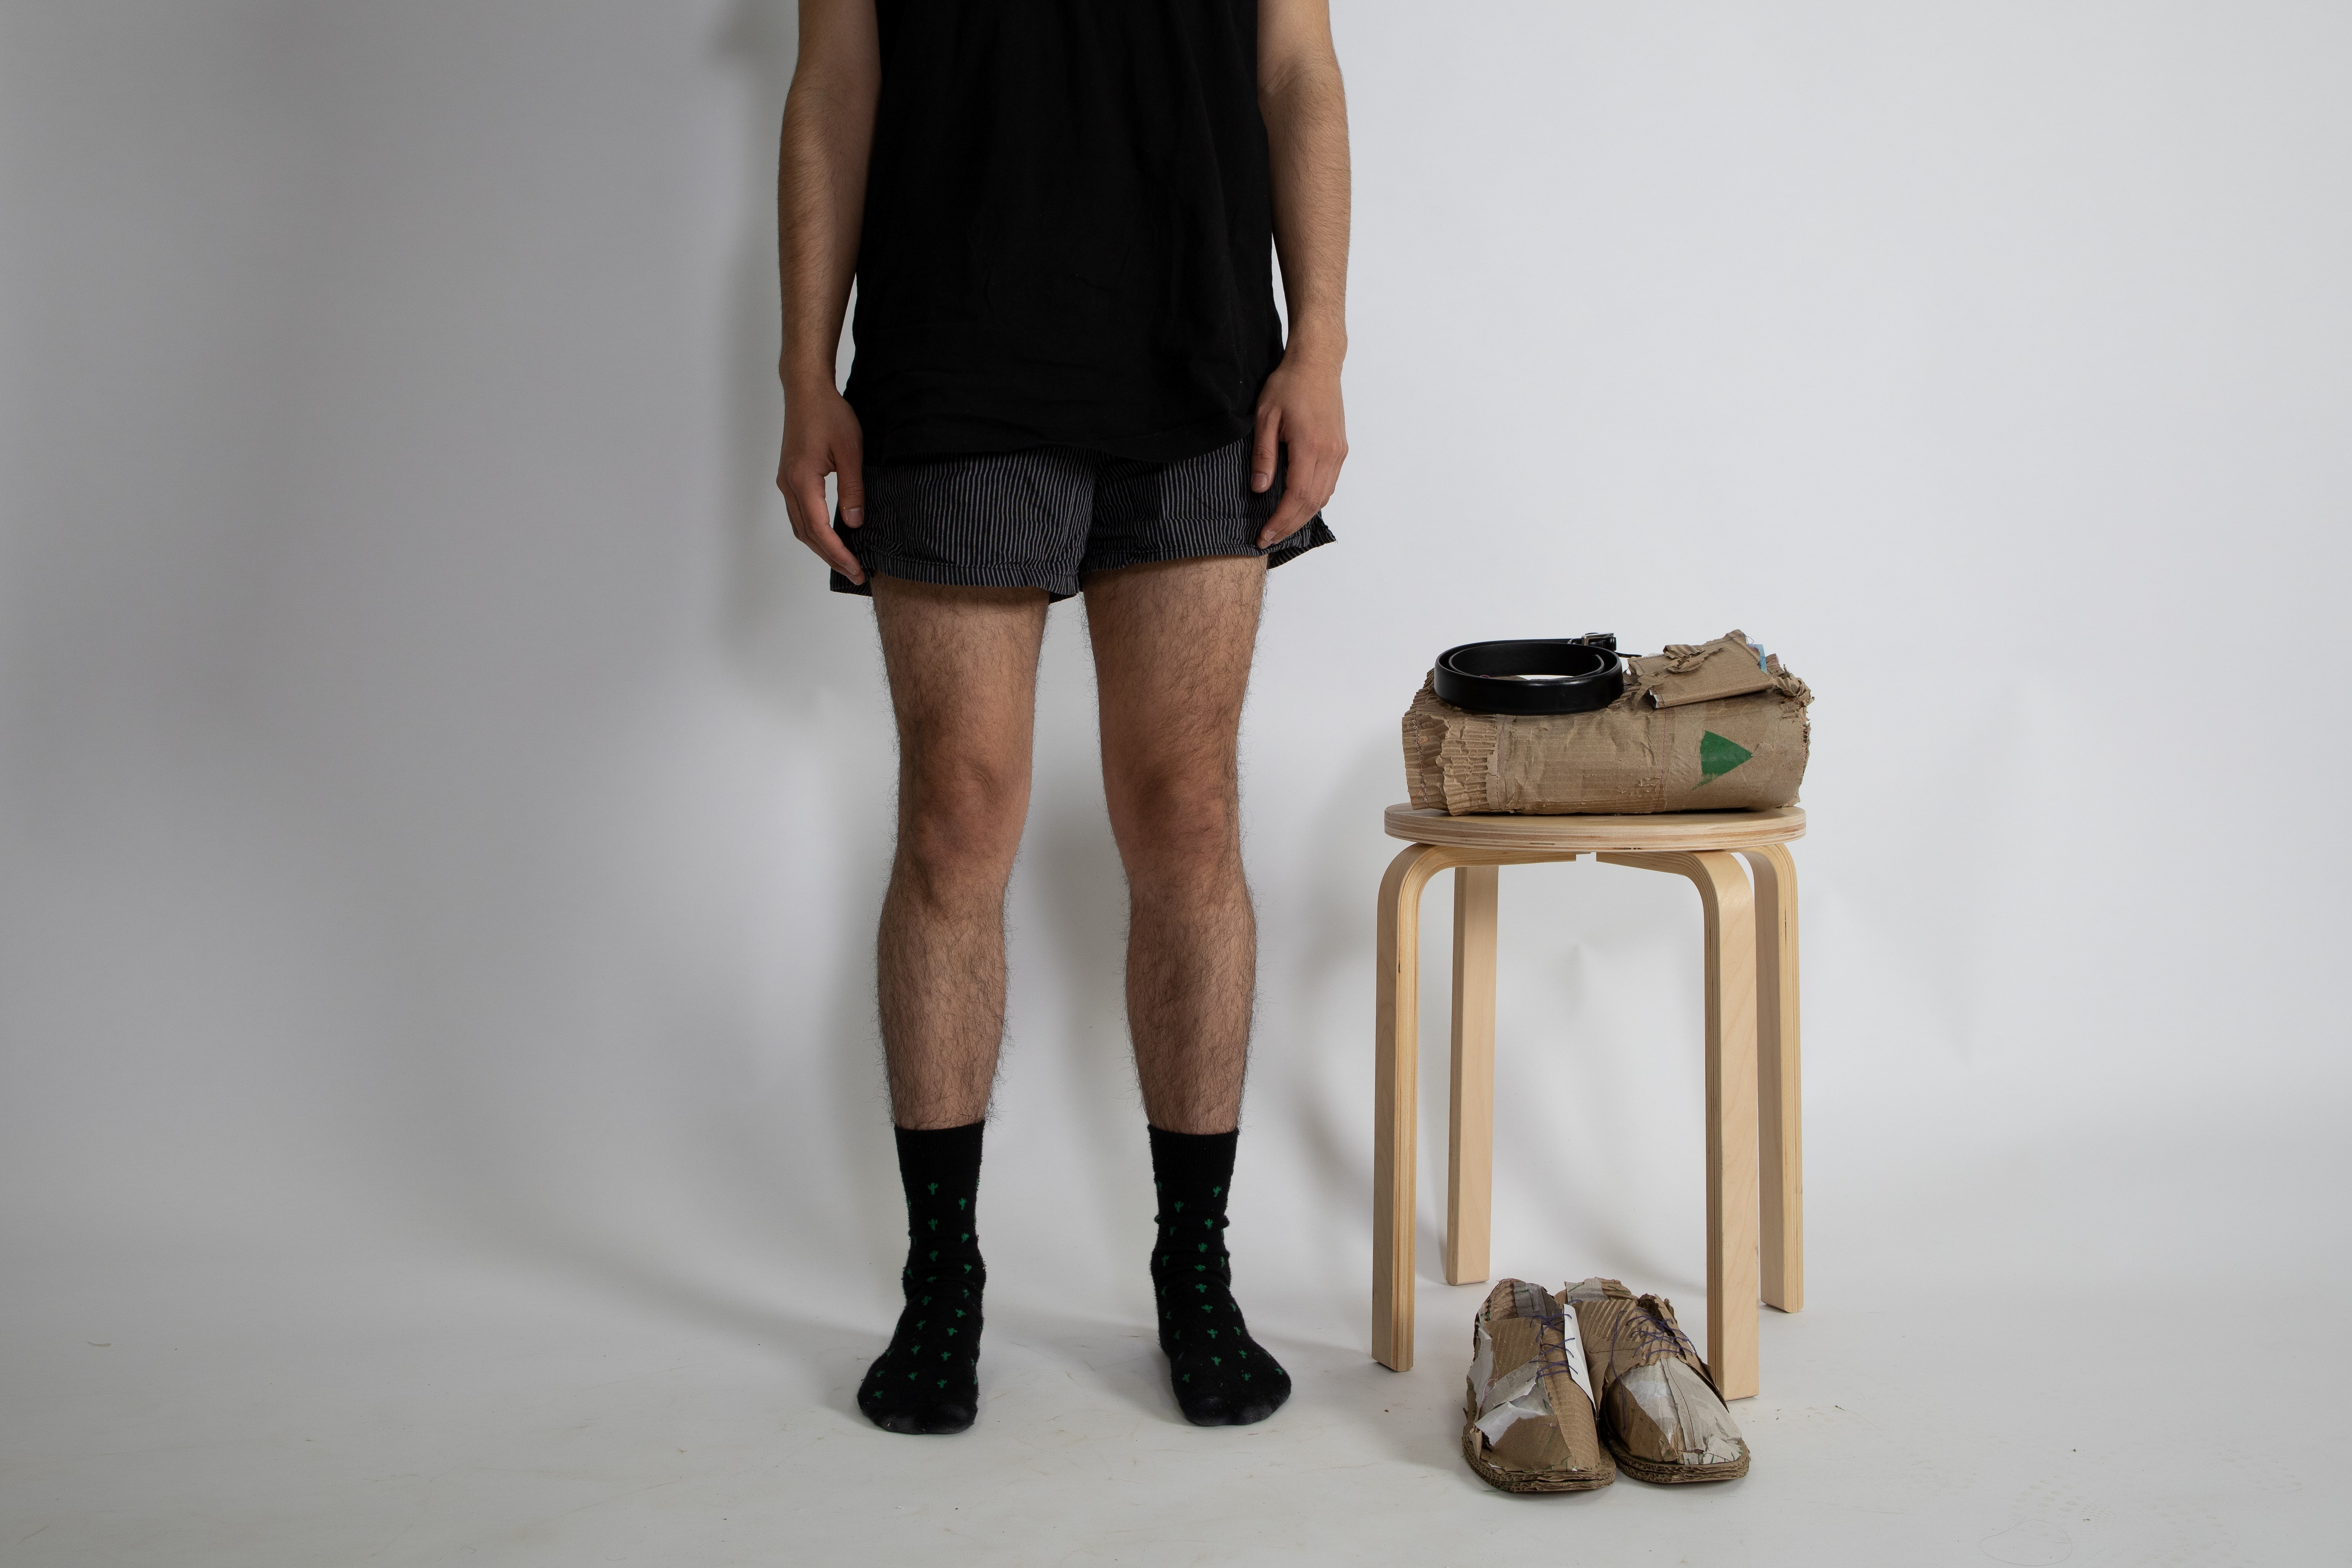 a person stnding in black socks and boxers. To the right is a short stool with folded cardboard and a belt. Bellow the stool is a pair of shoes made from cardboard